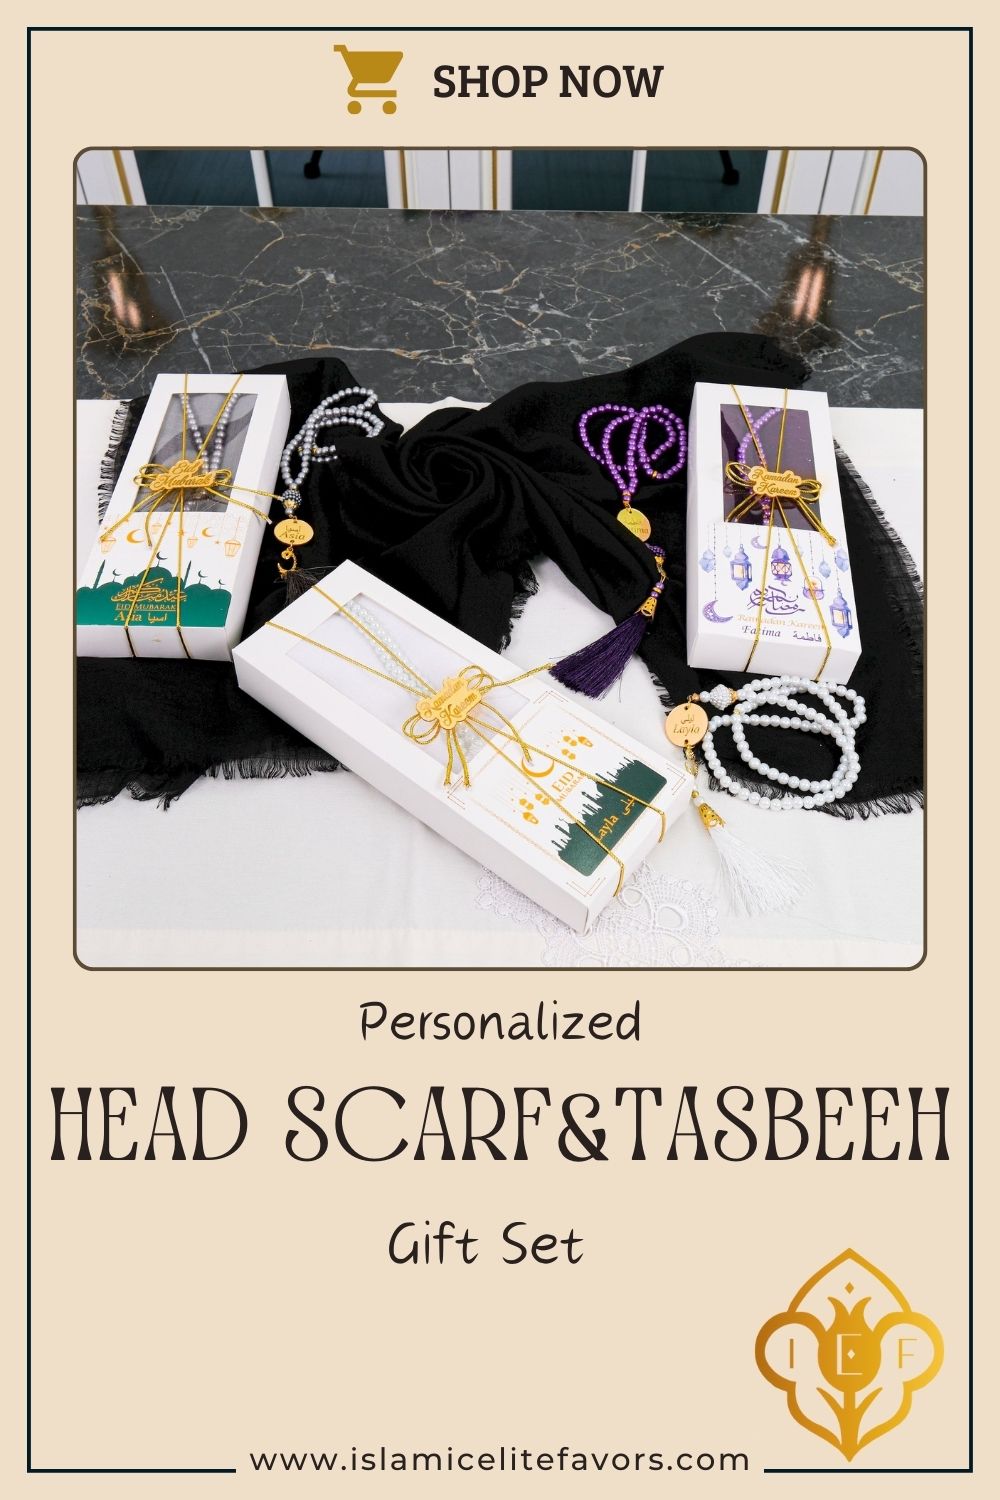 Personalized Head Scarf Hijab Tasbeeh Gift Set Ramadan Eid Anniversary - Islamic Elite Favors is a handmade gift shop offering a wide variety of unique and personalized gifts for all occasions. Whether you're looking for the perfect Ramadan, Eid, Hajj, wedding gift or something special for a birthday, baby shower or anniversary, we have something for everyone. High quality, made with love.